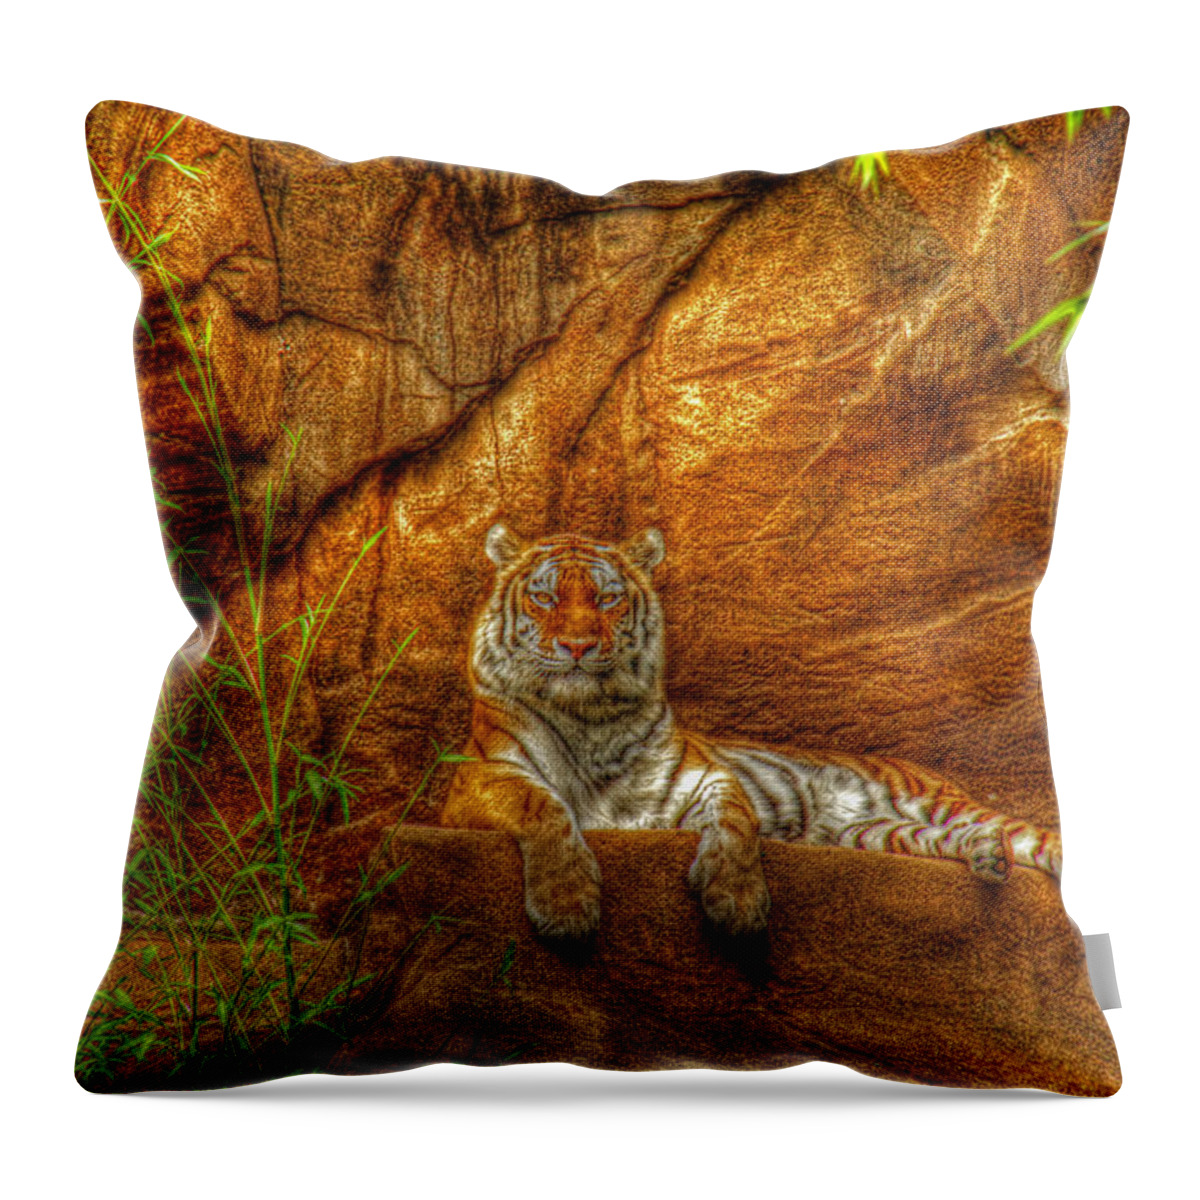 Tiger Throw Pillow featuring the photograph Magnificent Tiger resting by Andy Lawless